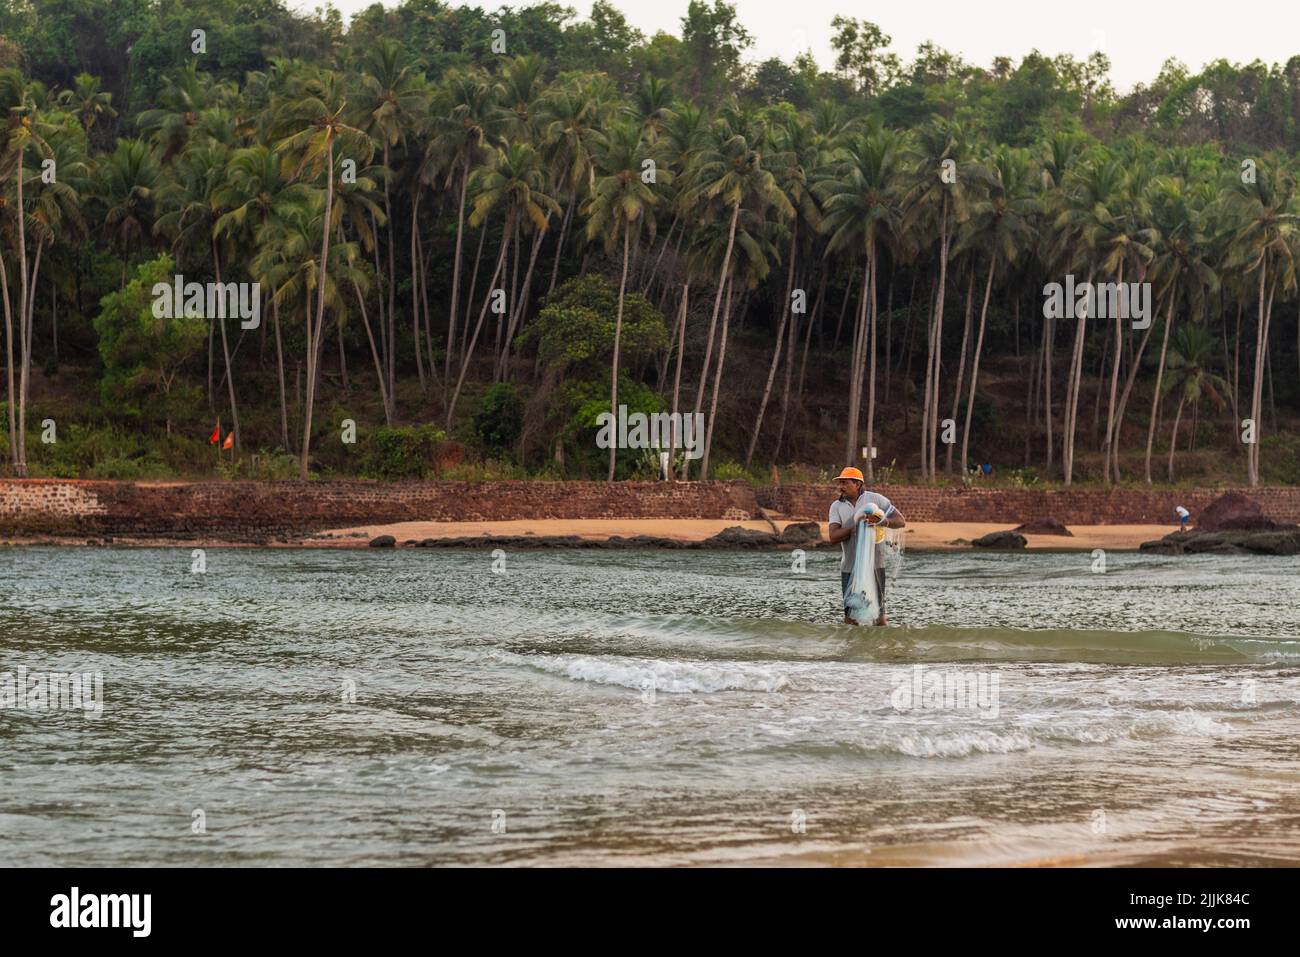 A local Indian fisherman throwing the net into the ocean in the village of Betul, Salcete, Goa, India Stock Photo